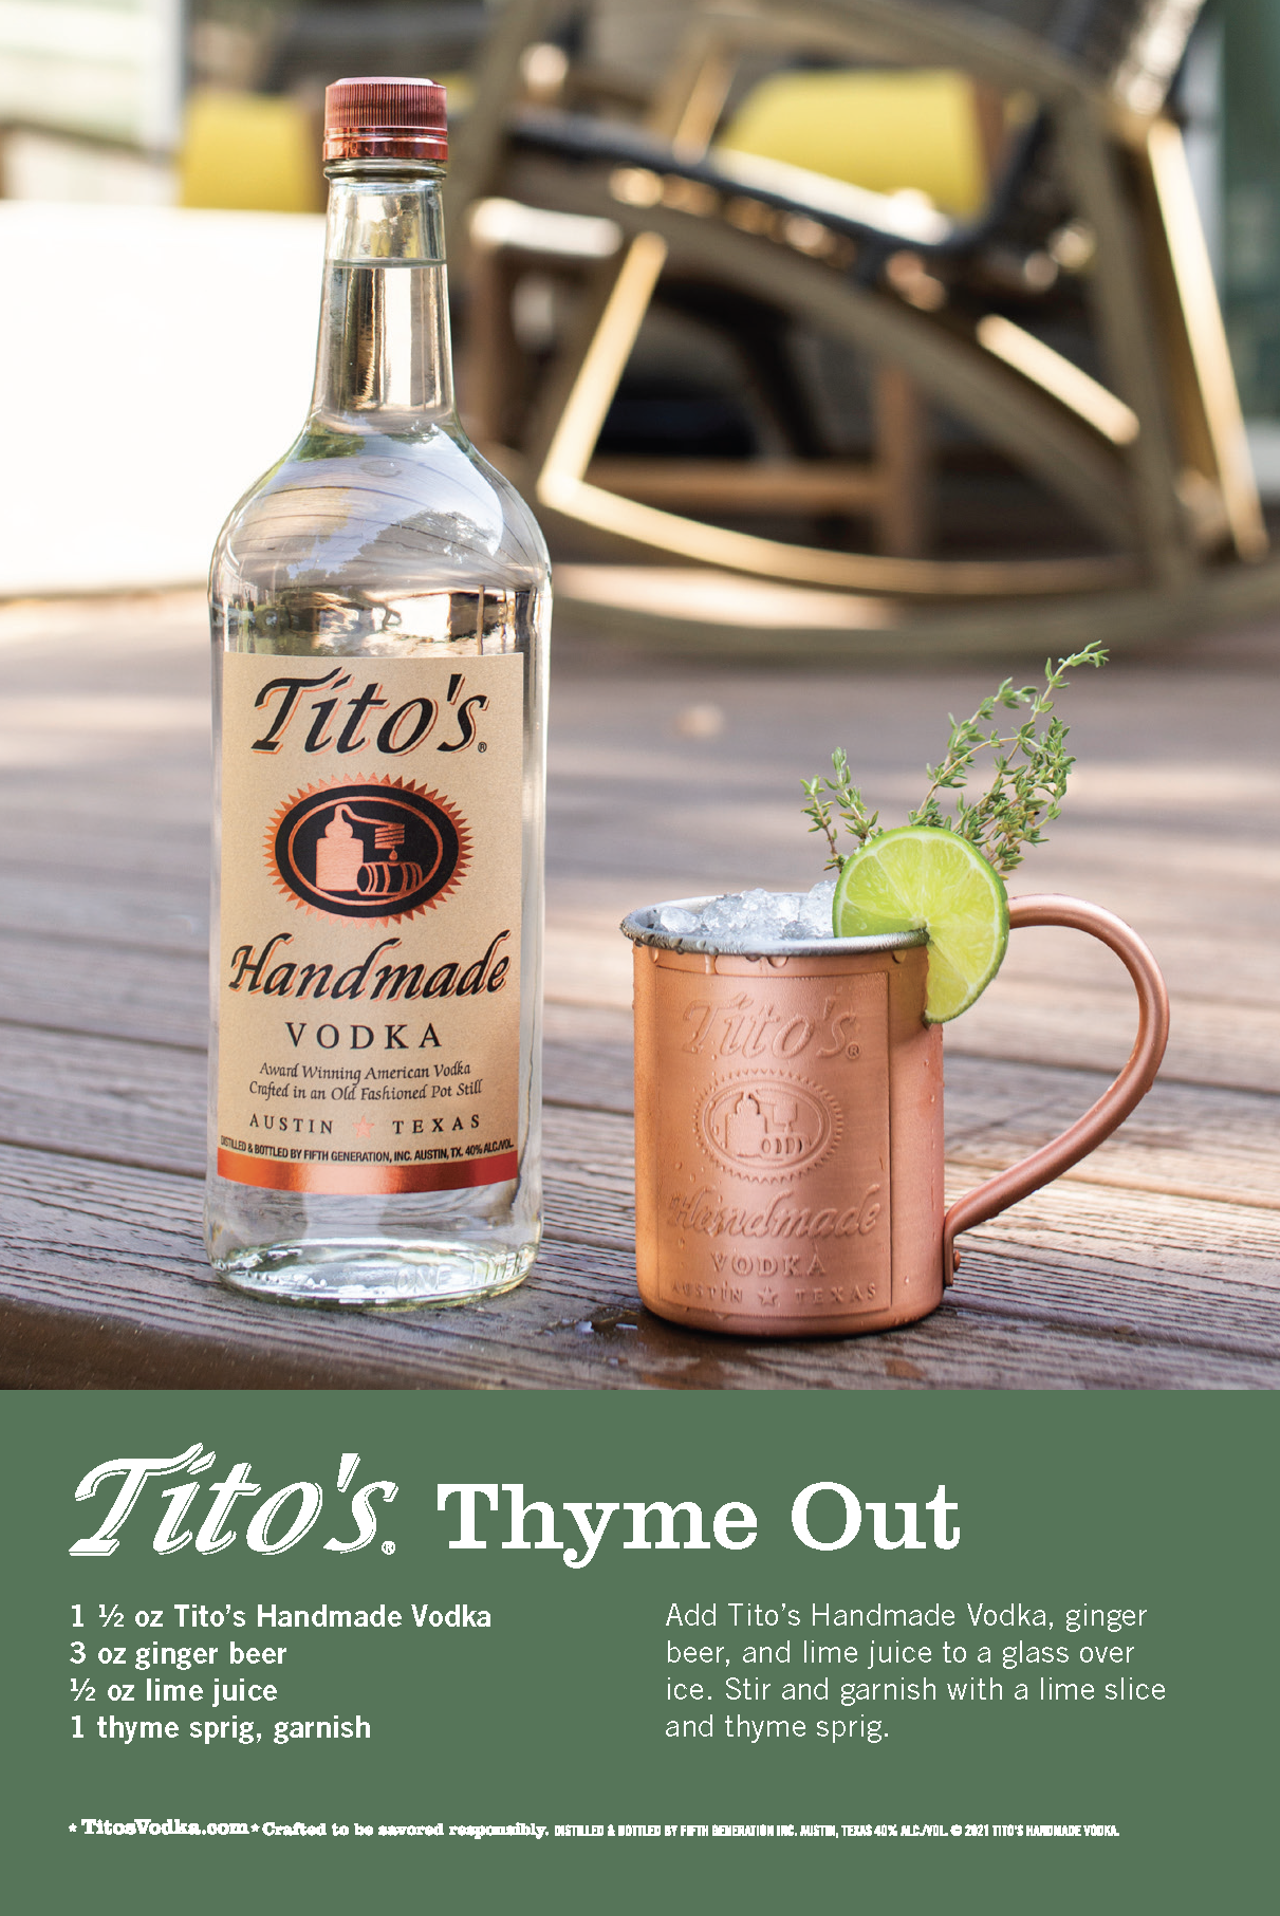 Thyme Out
Try more Tito's Handmade Vodka cocktails here!